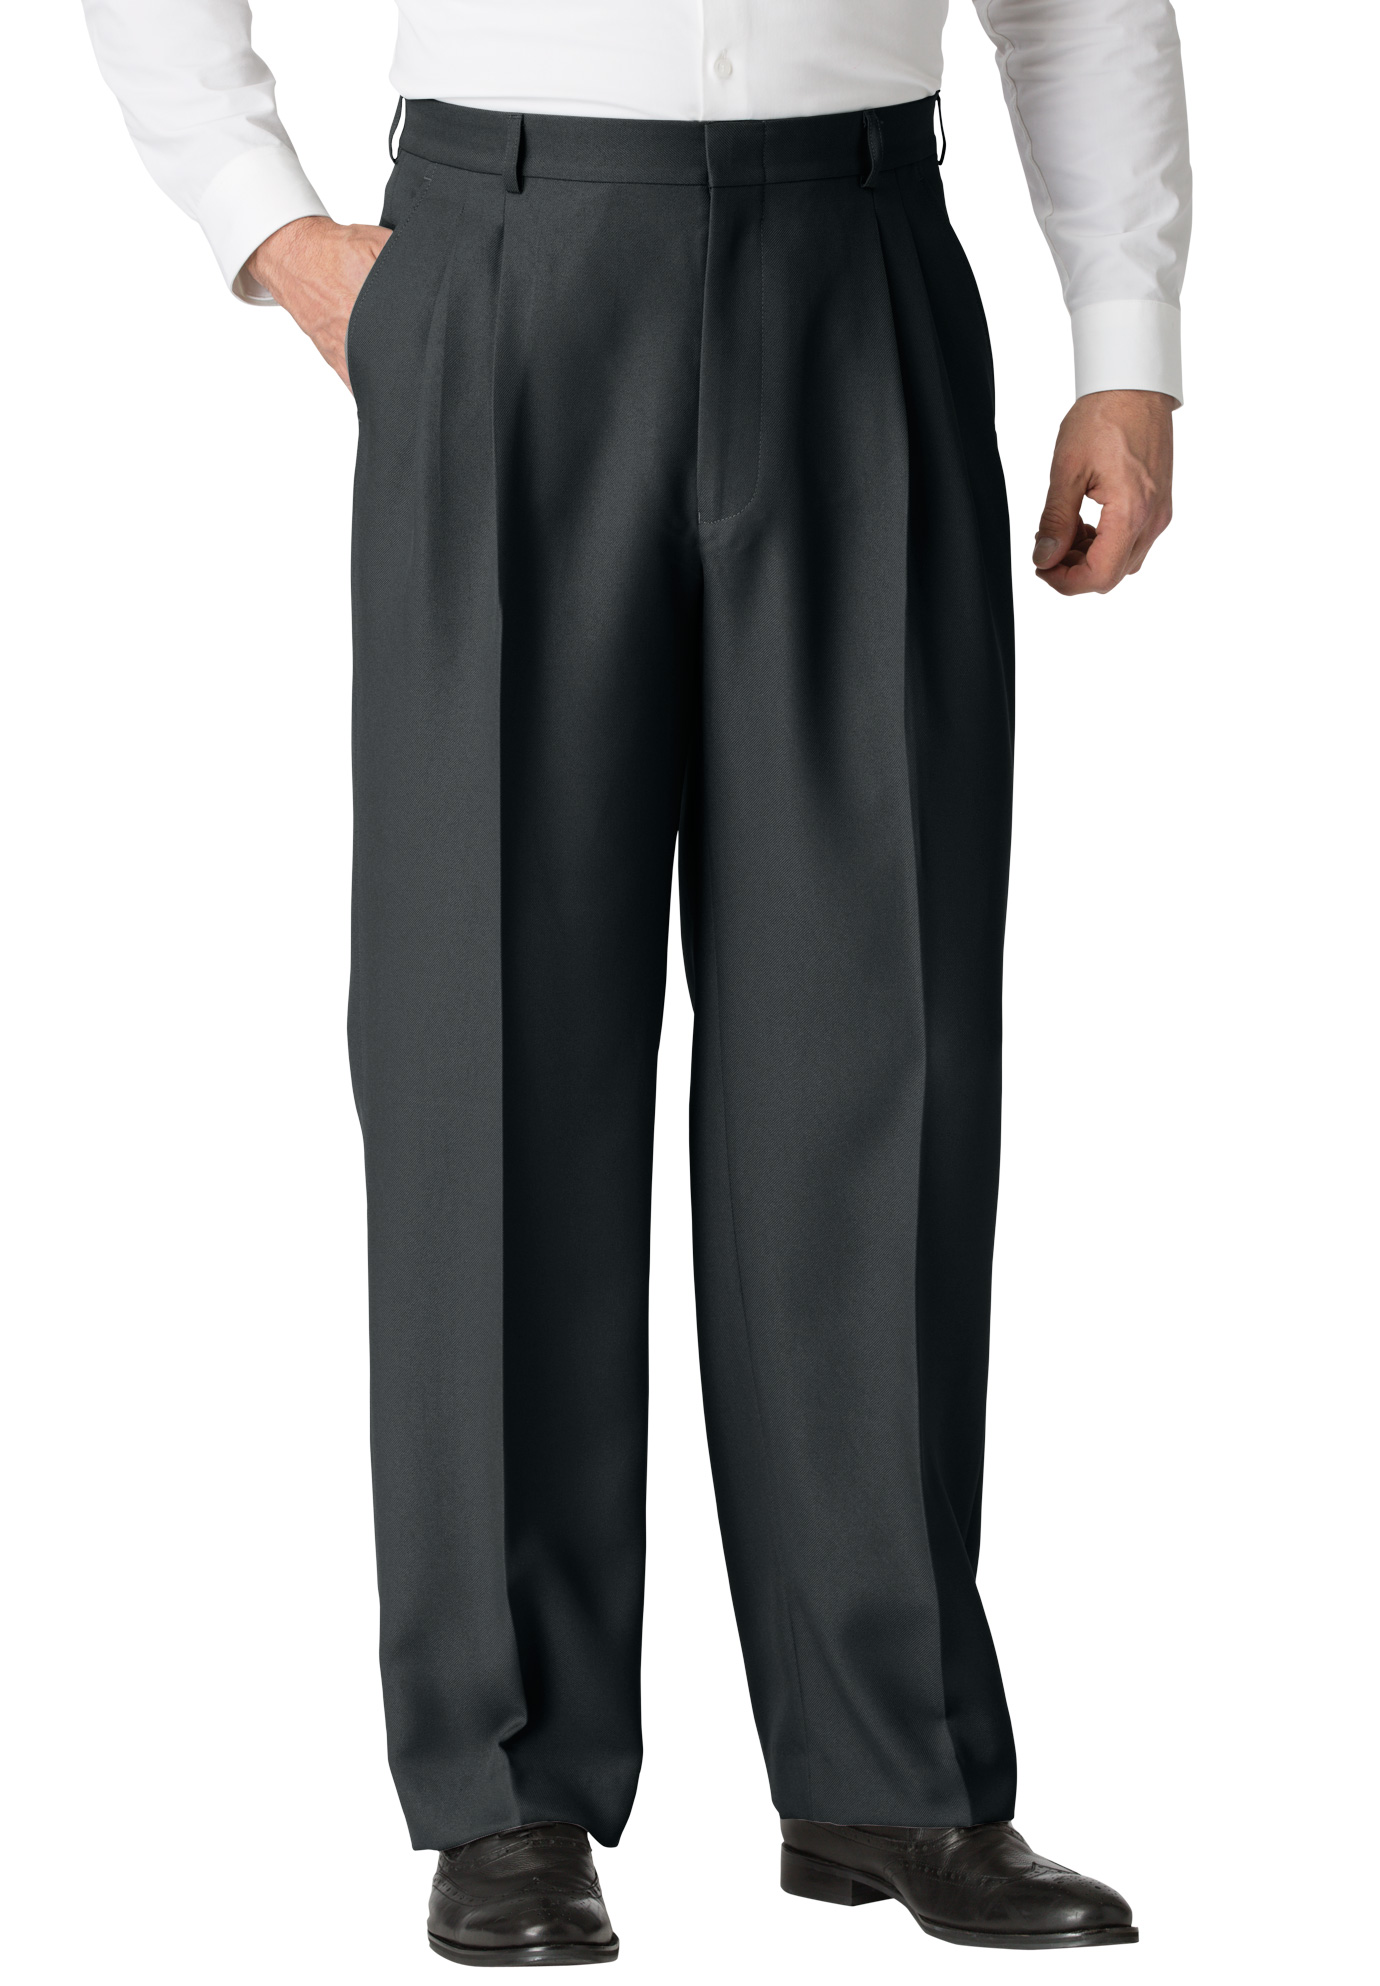 Easy-Care Double-Pleat Inner Stretch Dress Pants by KS Signature ...